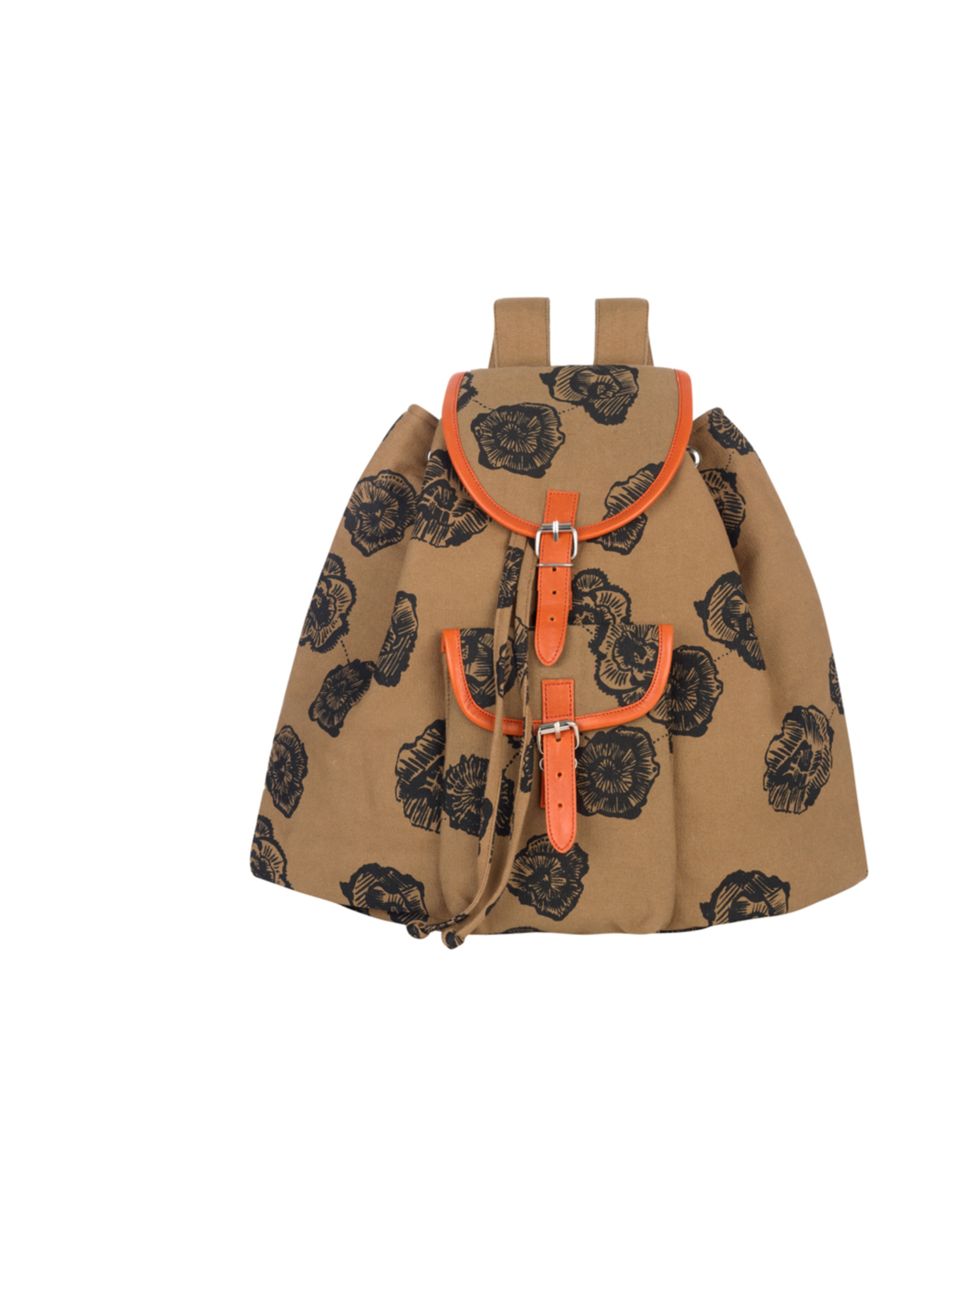 <p>Make a note of this name. Kate Sheridan is the independent East London designer weve been admiring for some time and now shes been snapped up by high street hero New Look... Kate Sheridan printed backpack, £49.99, at <a href="http://www.newlook.com/s